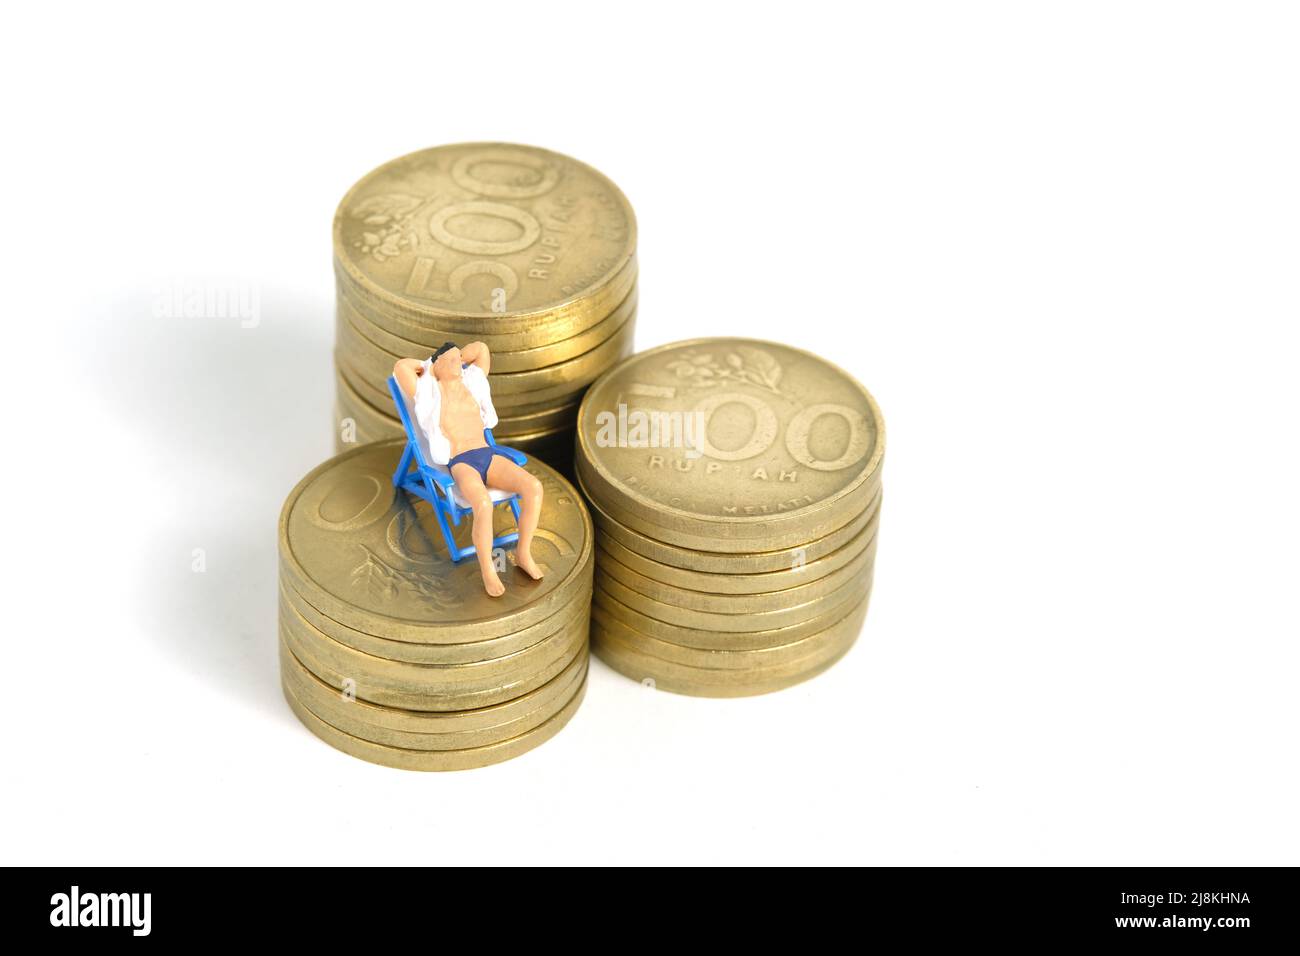 Miniature people toy figure photography. Budget and Financial Plan for travel. Men relaxing seat at beach chair above money coin stack, isolated on wh Stock Photo